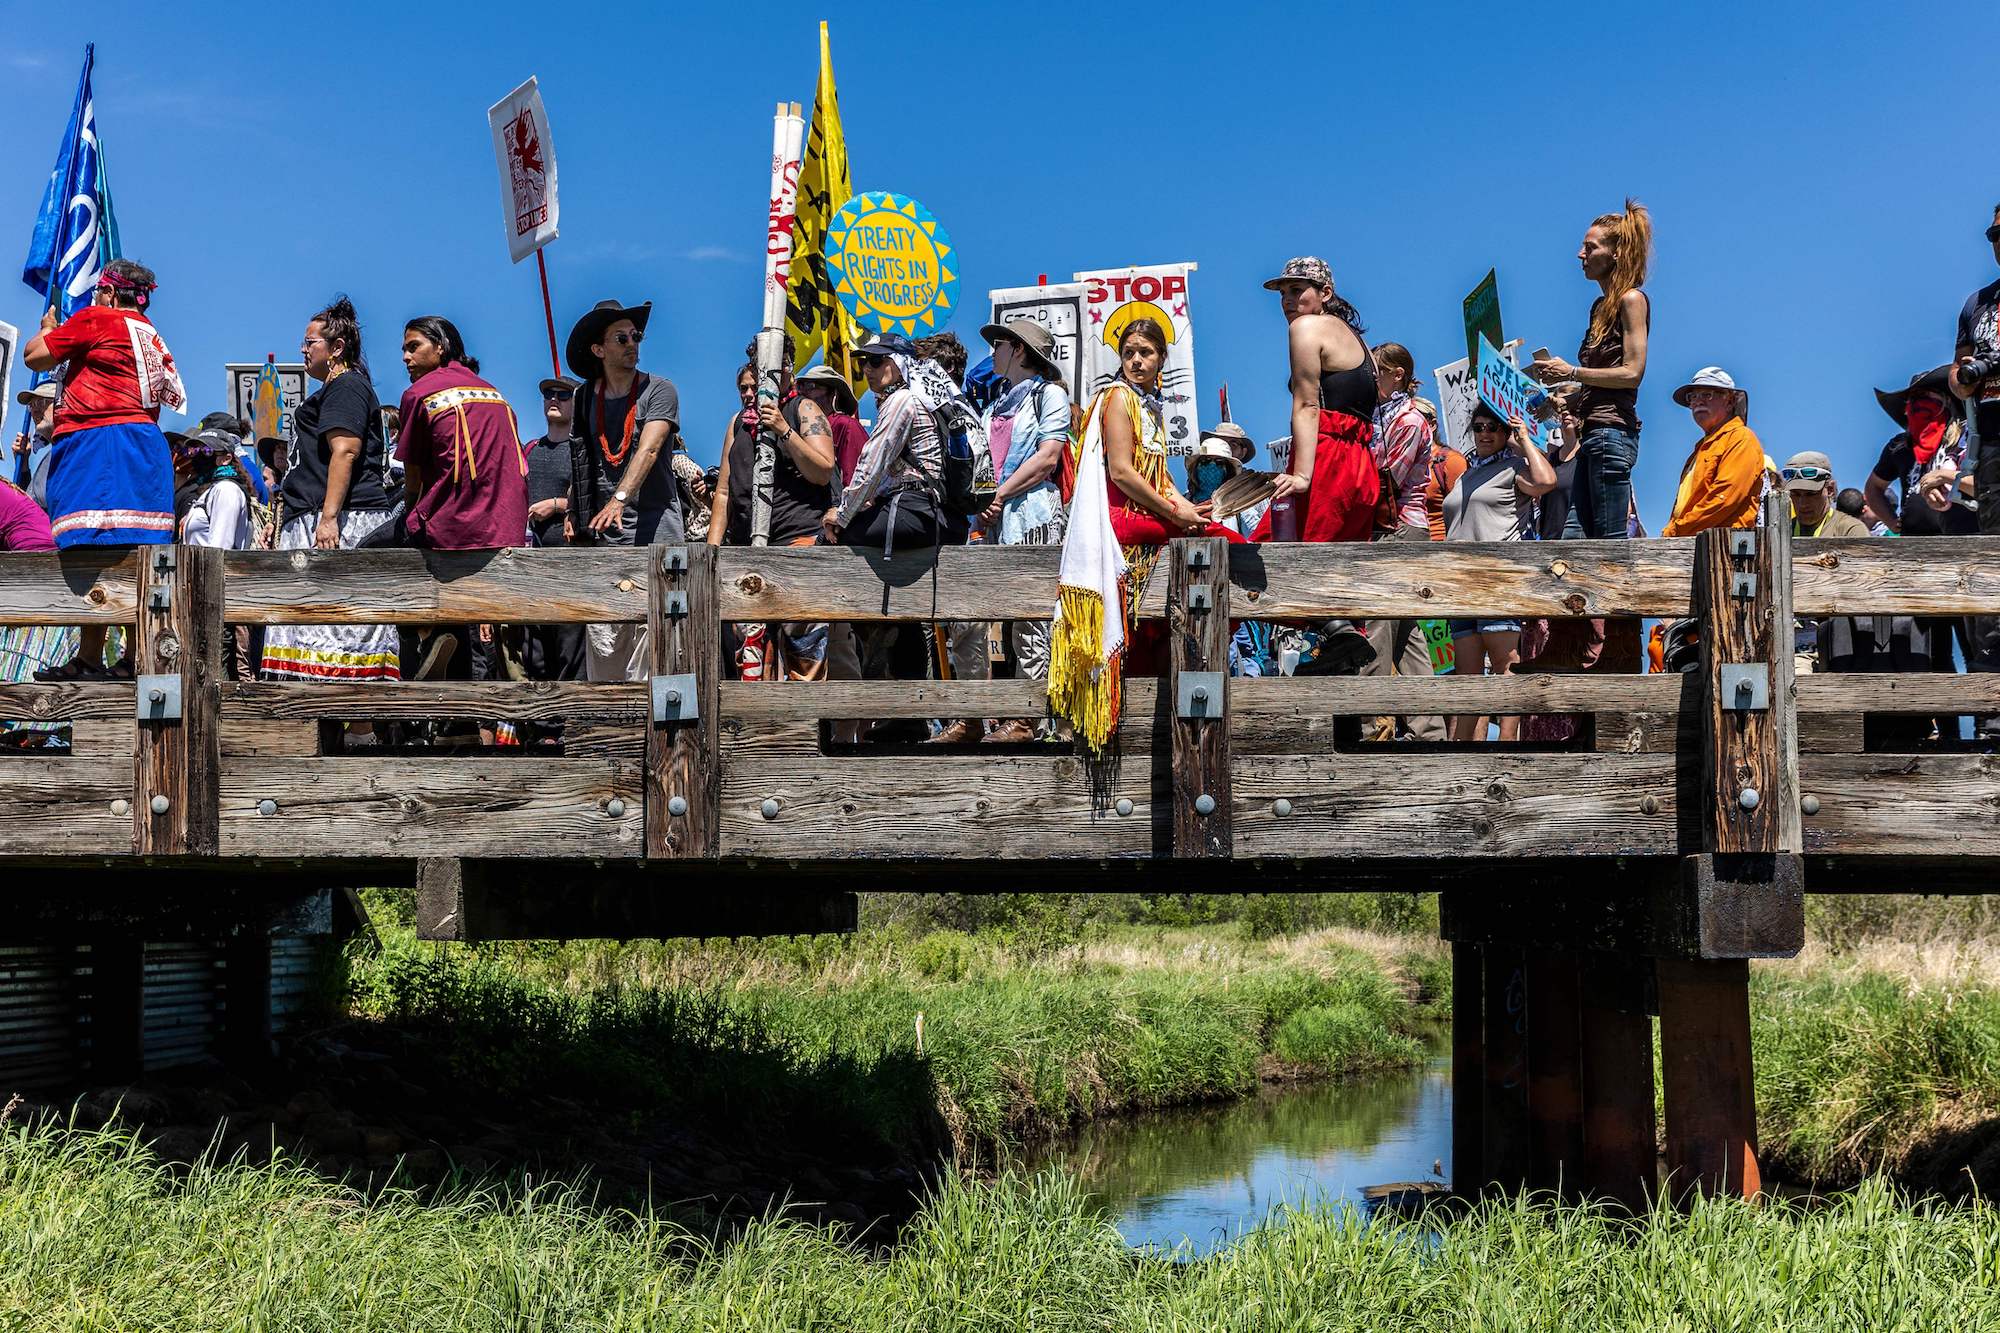 a large group of activists, many of whom are dressed in traditional indigenous clothing, stand on a wooden bridge over a river thick with green buhes